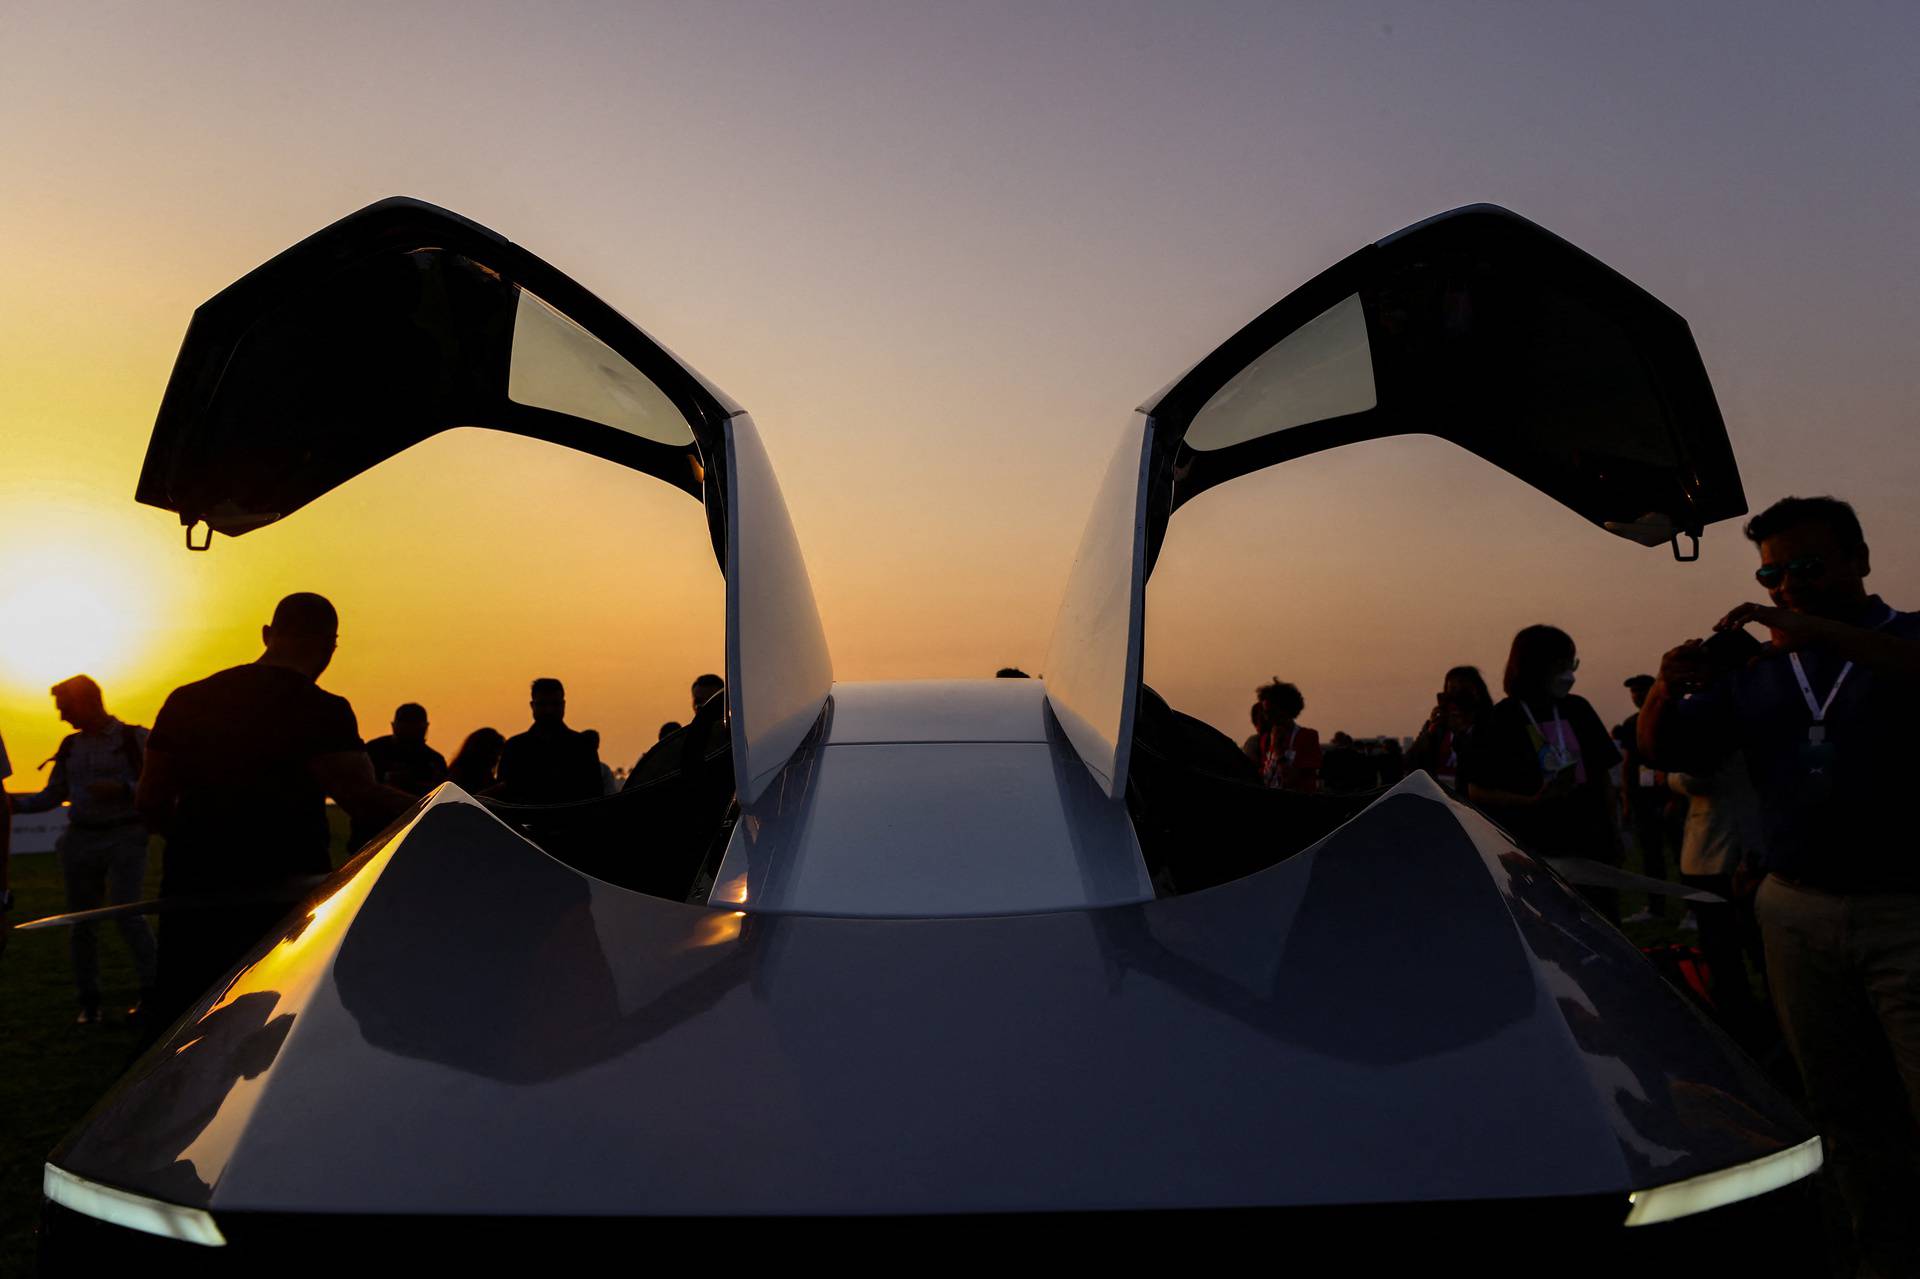 XPeng's eVTOL flying car X2 makes its first public flying in Dubai